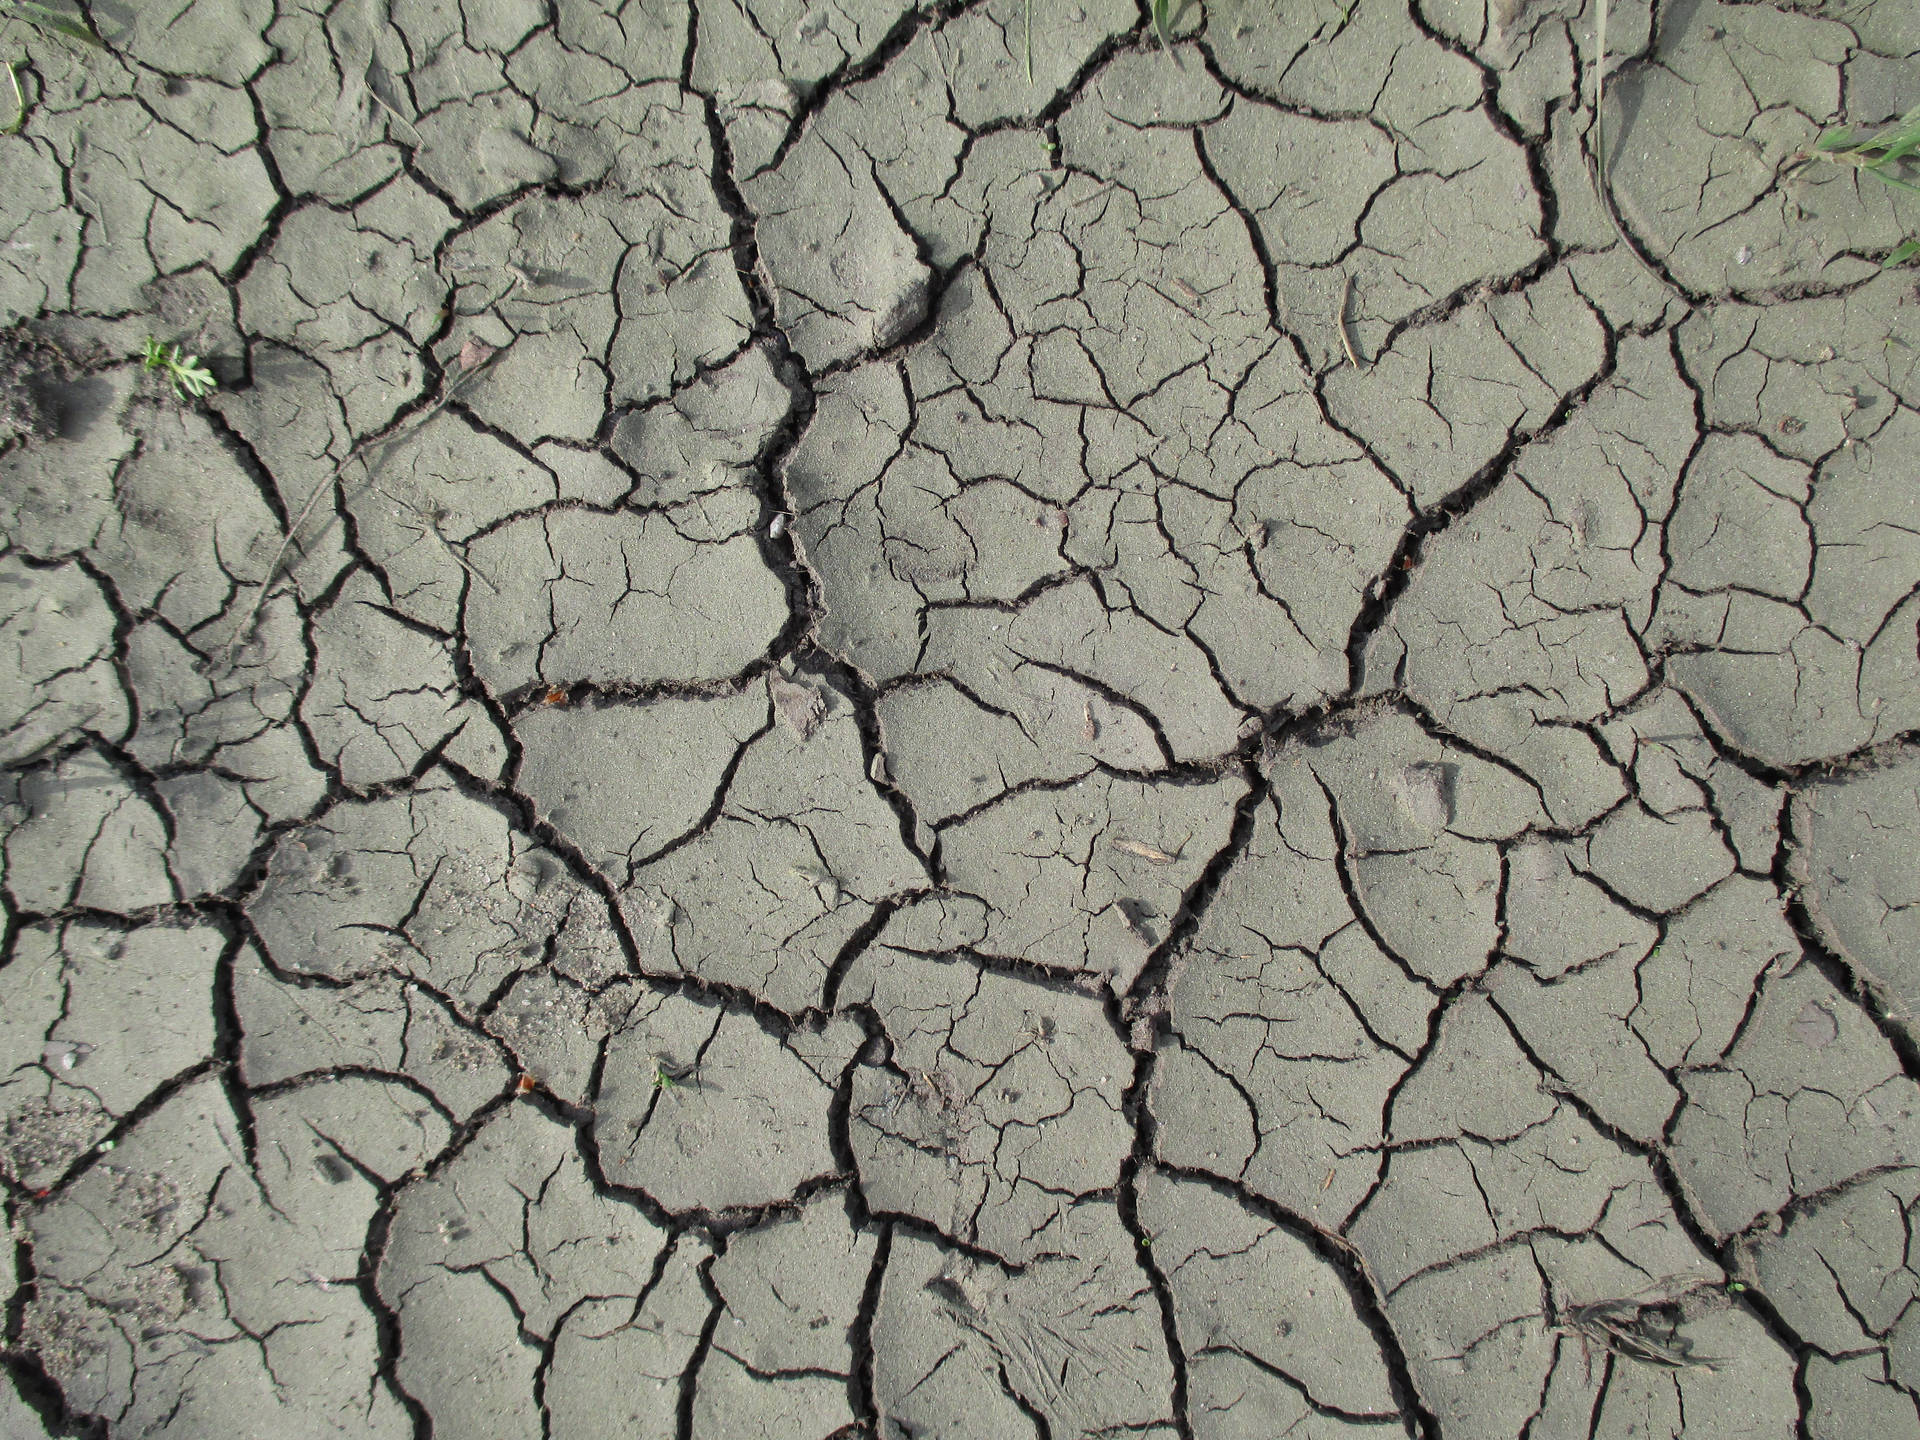 Drought Background Images, HD Pictures and Wallpaper For Free Download |  Pngtree